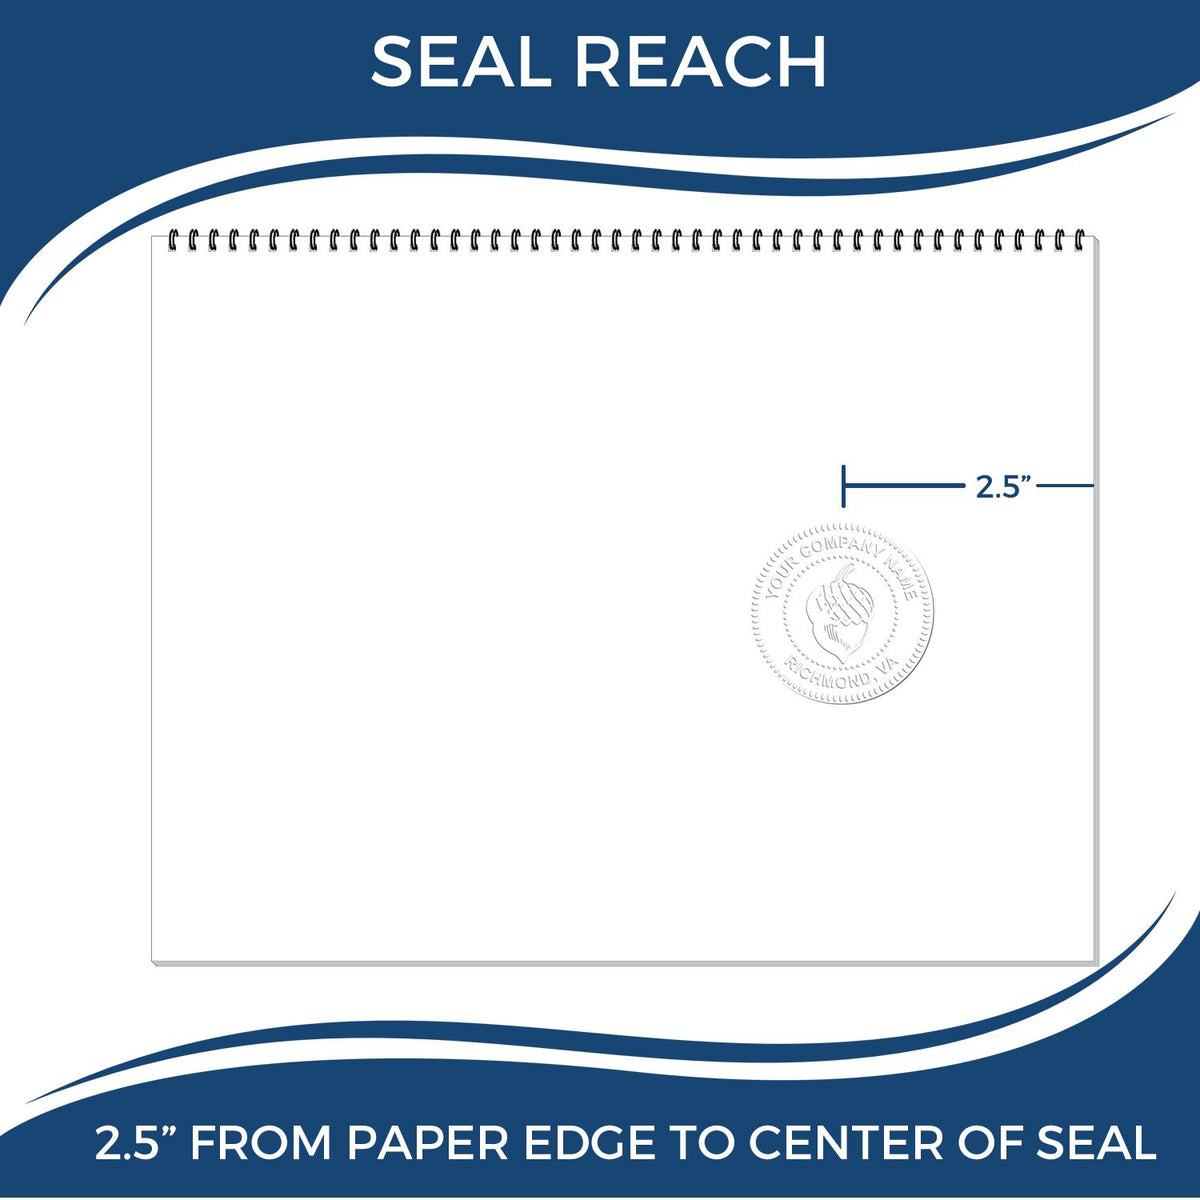 An infographic showing the seal reach which is represented by a ruler and a miniature seal image of the Long Reach Montana Geology Seal